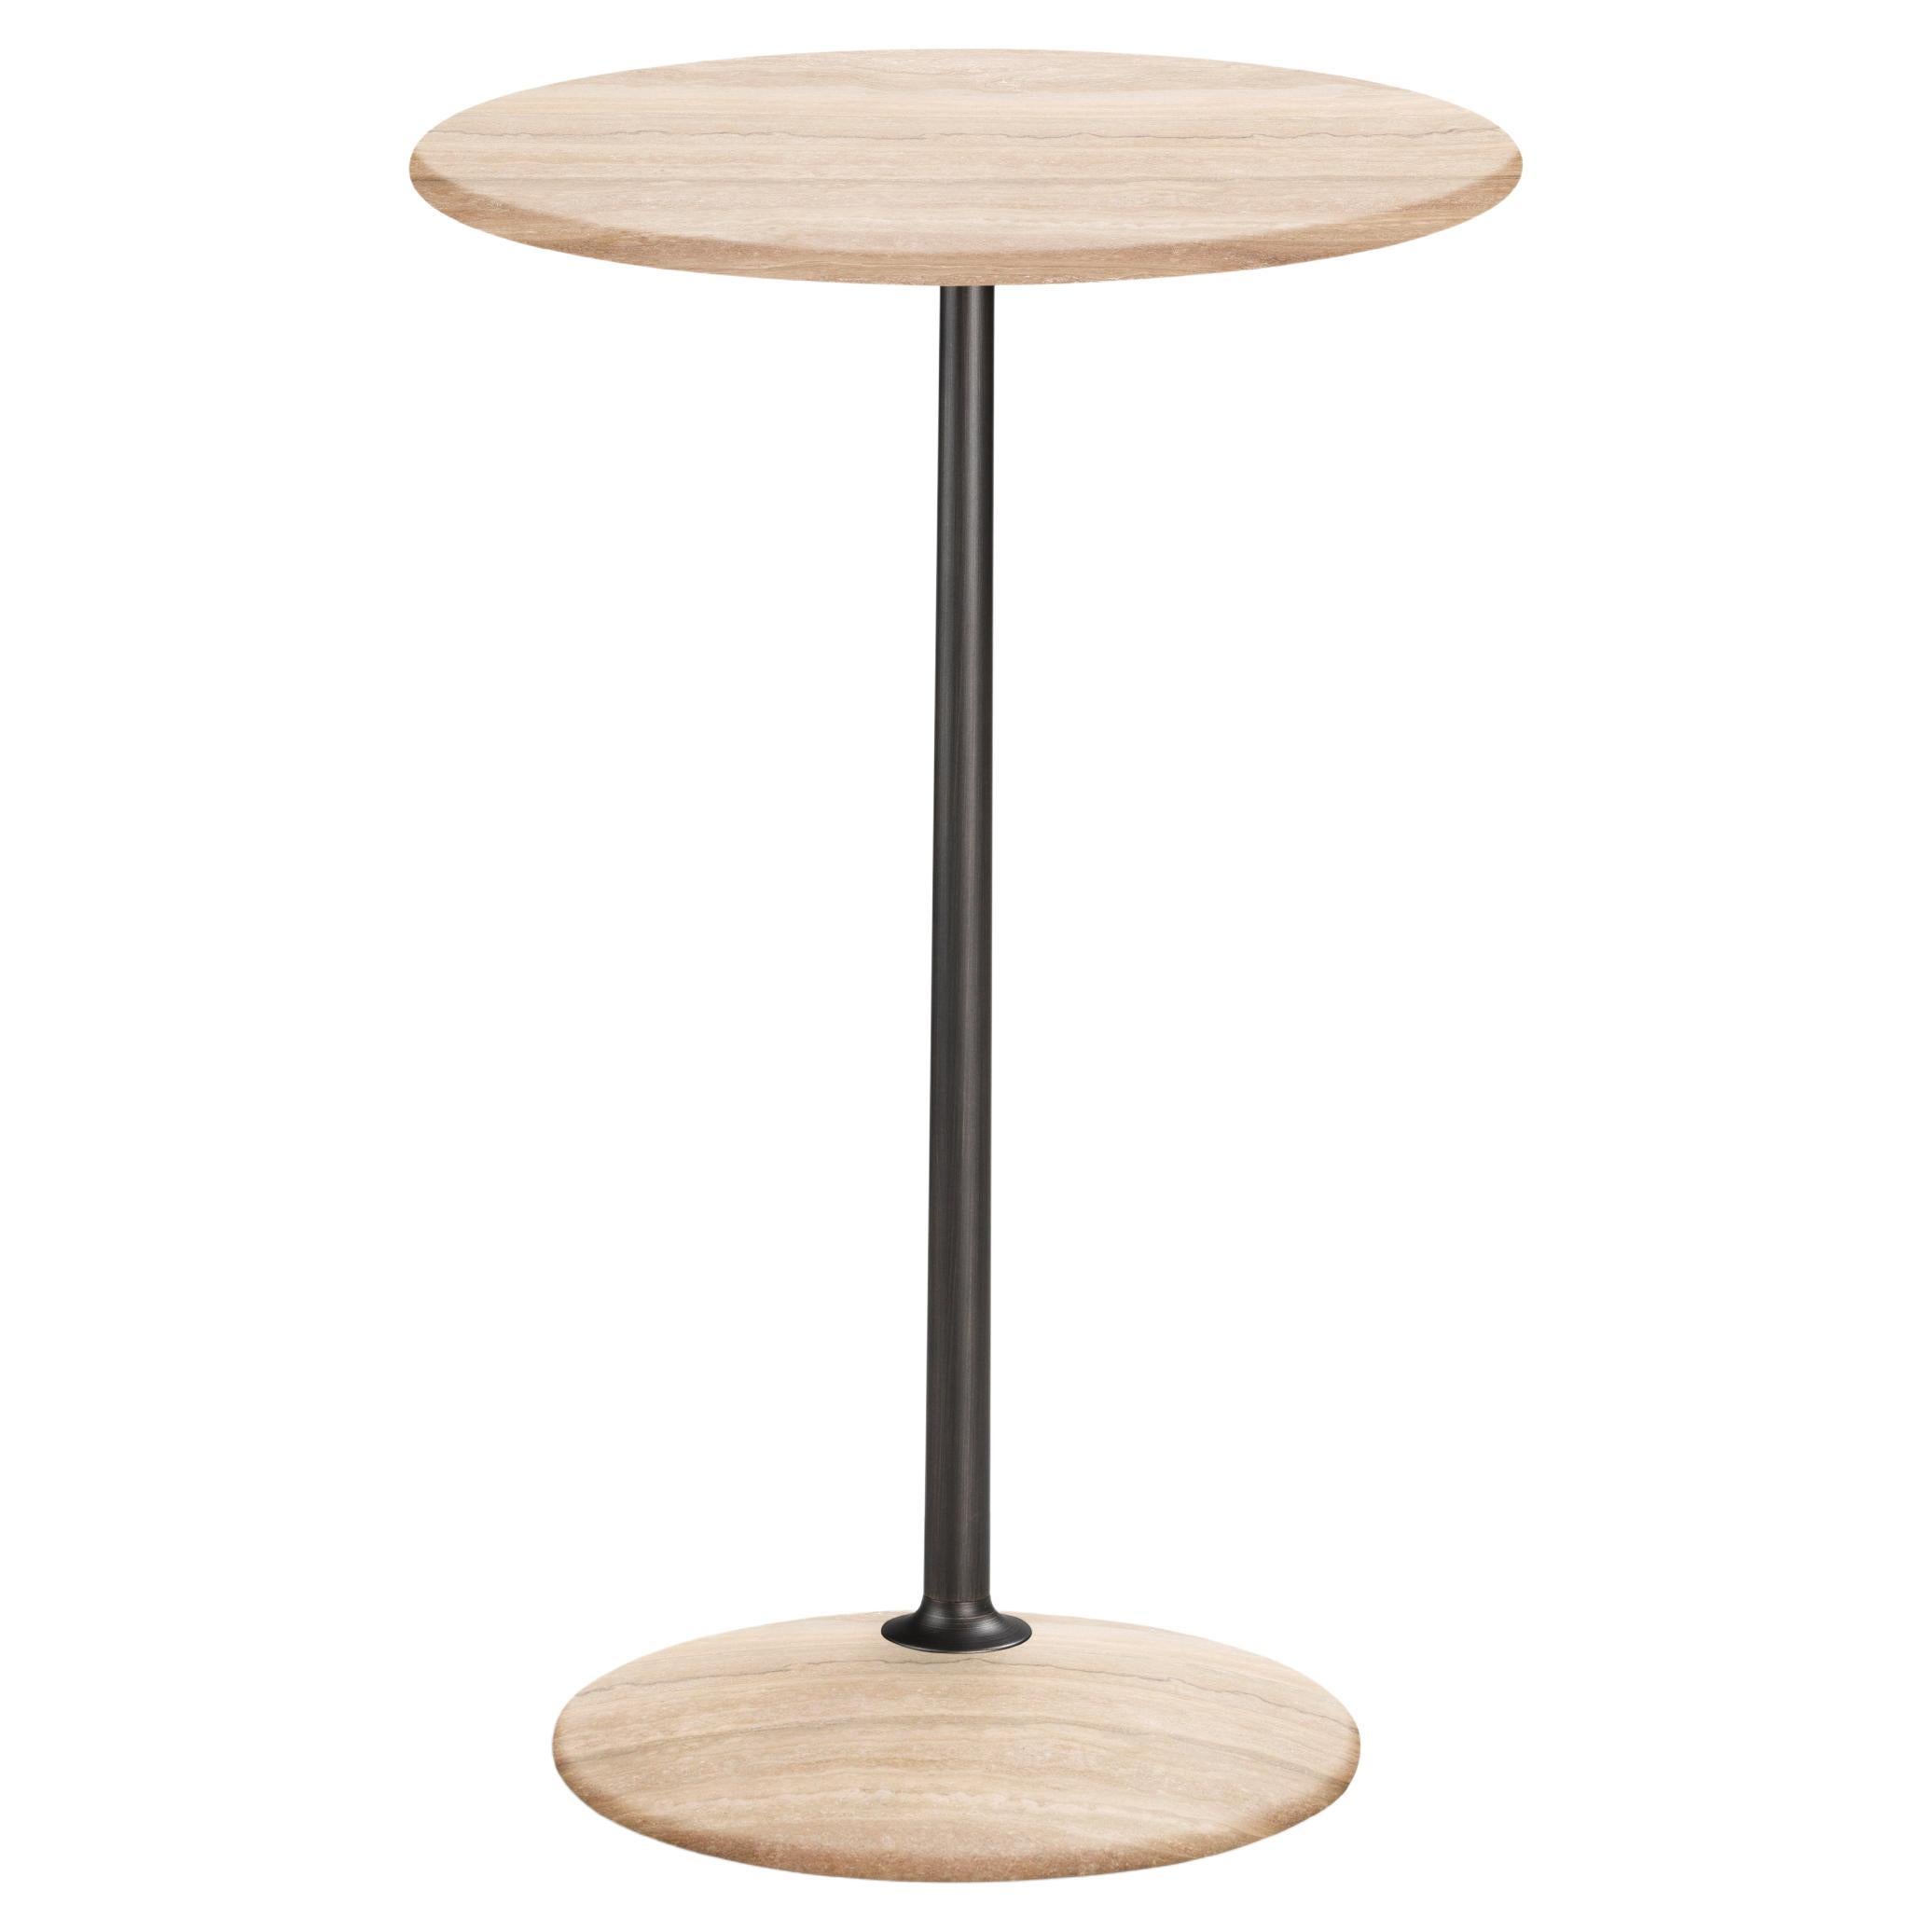 Arnold Tall Table, Travertine Top, Burnished Brass Structure, Made in Italy